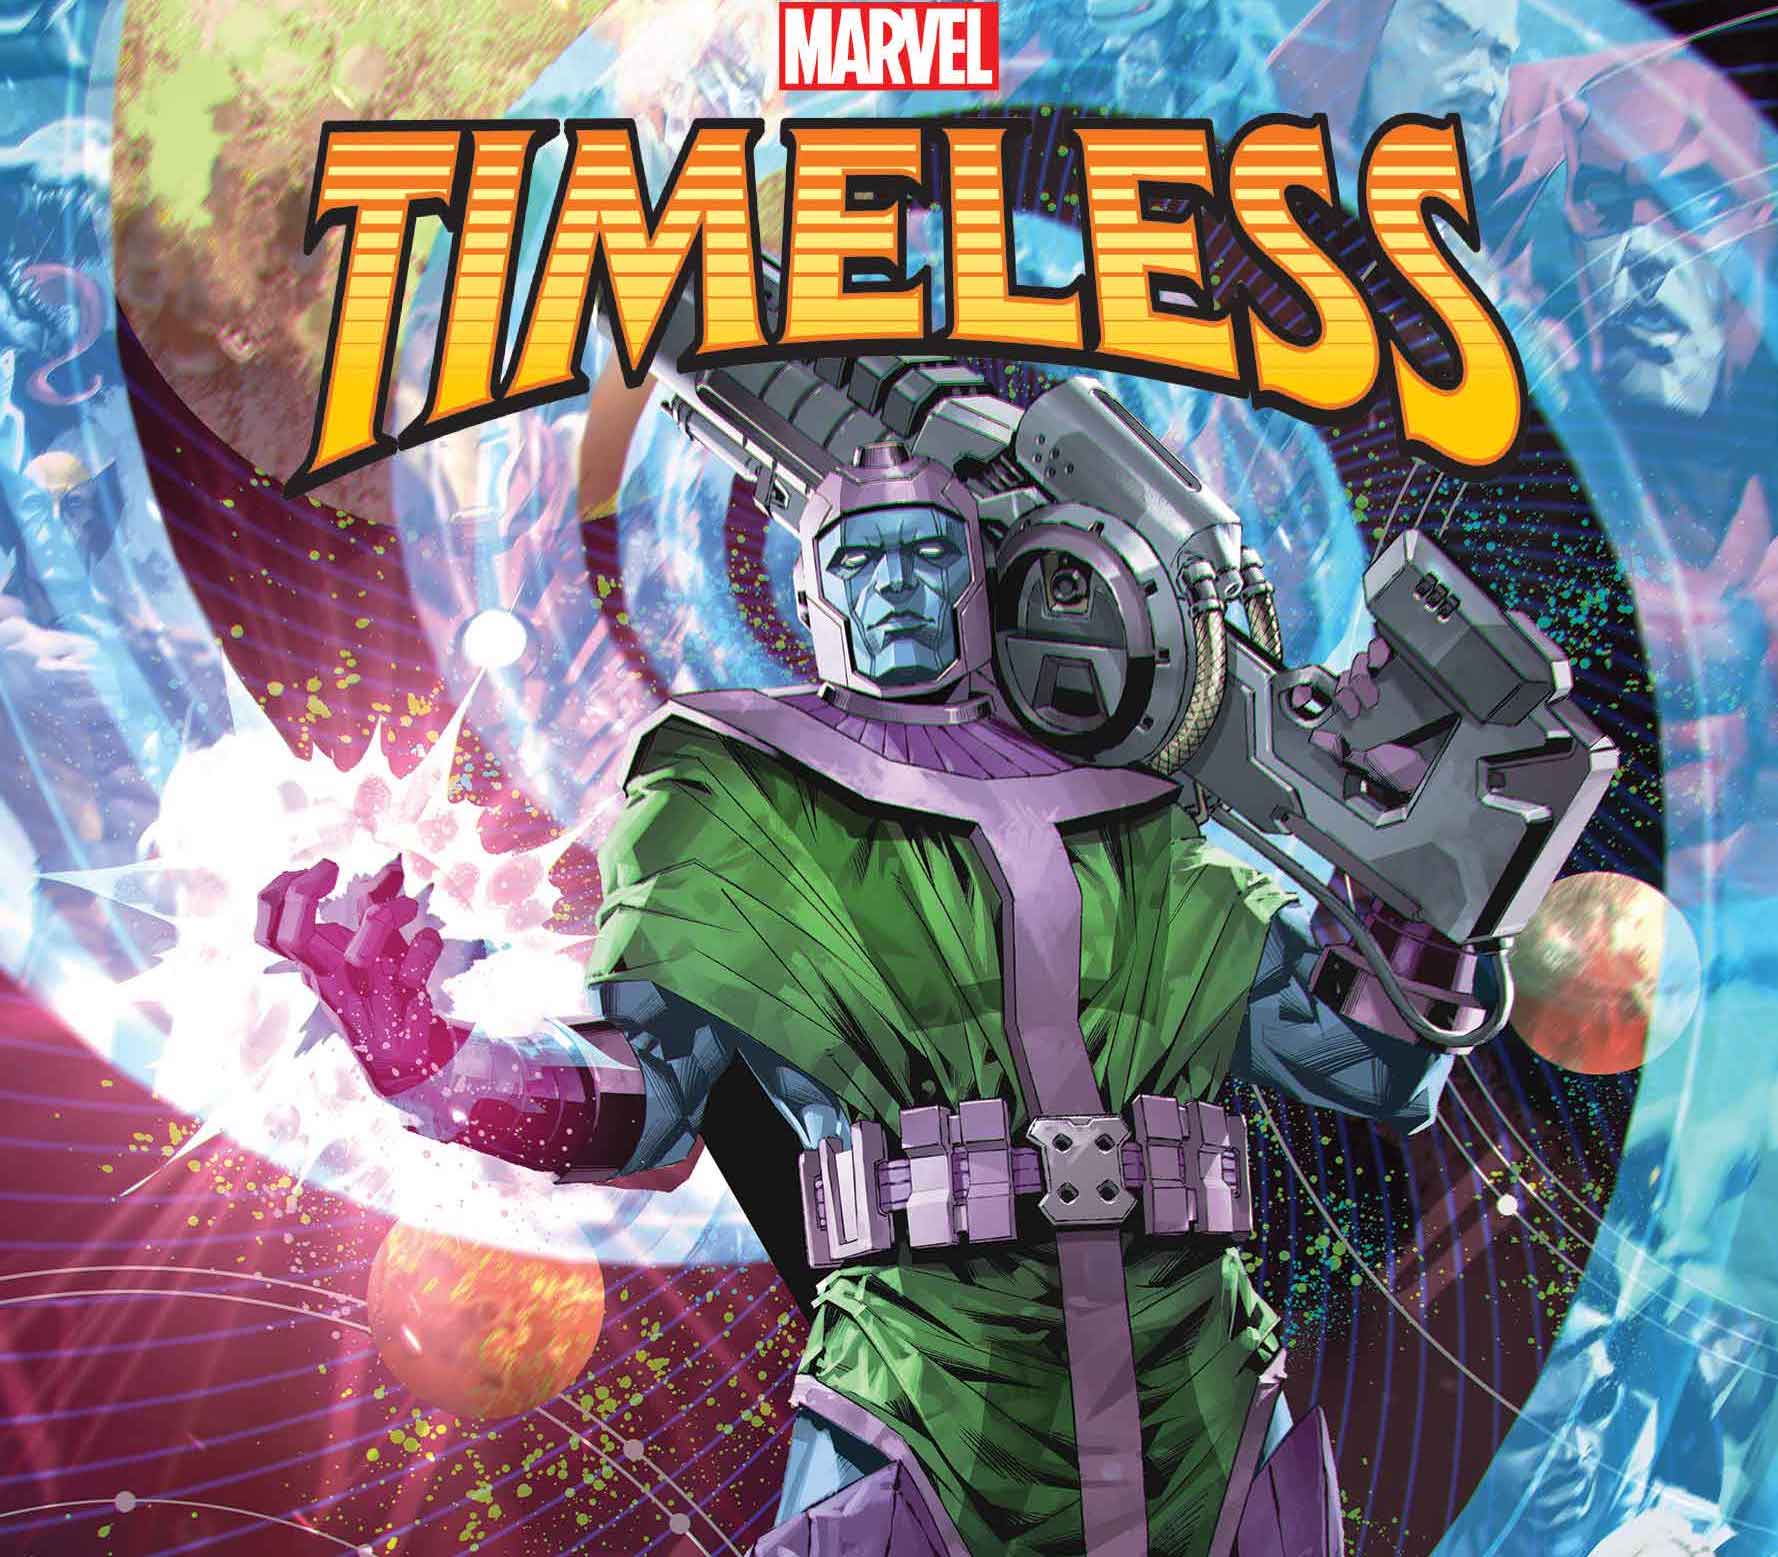 'Timeless' #1 is a great one-shot punctuated by huge Marvel reveals